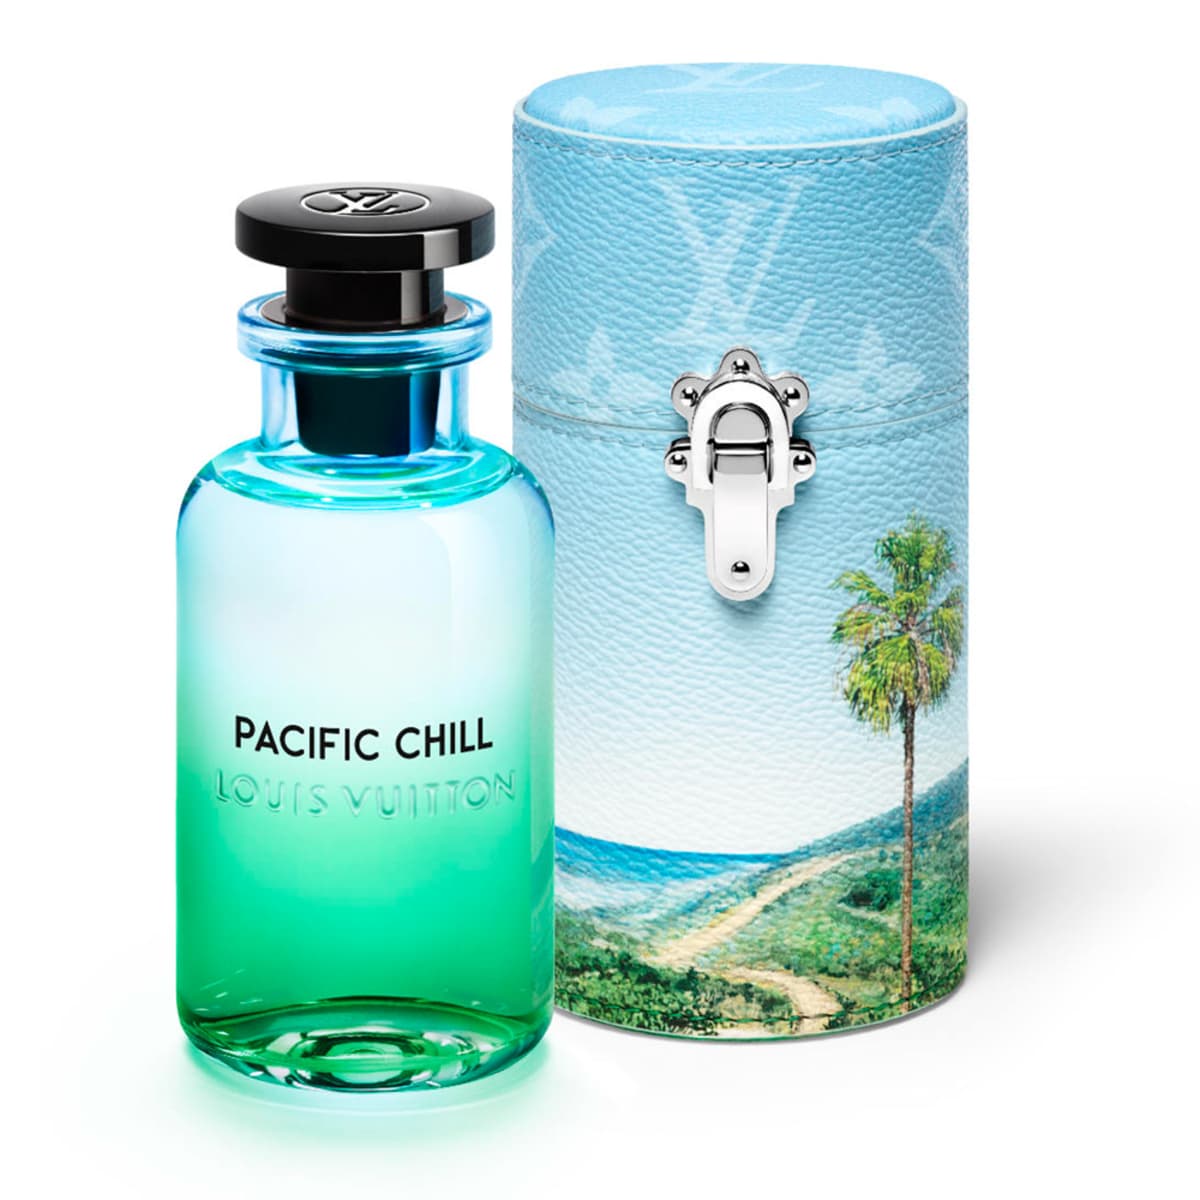 Louis Vuitton's new California-centric fragrance was inspired by